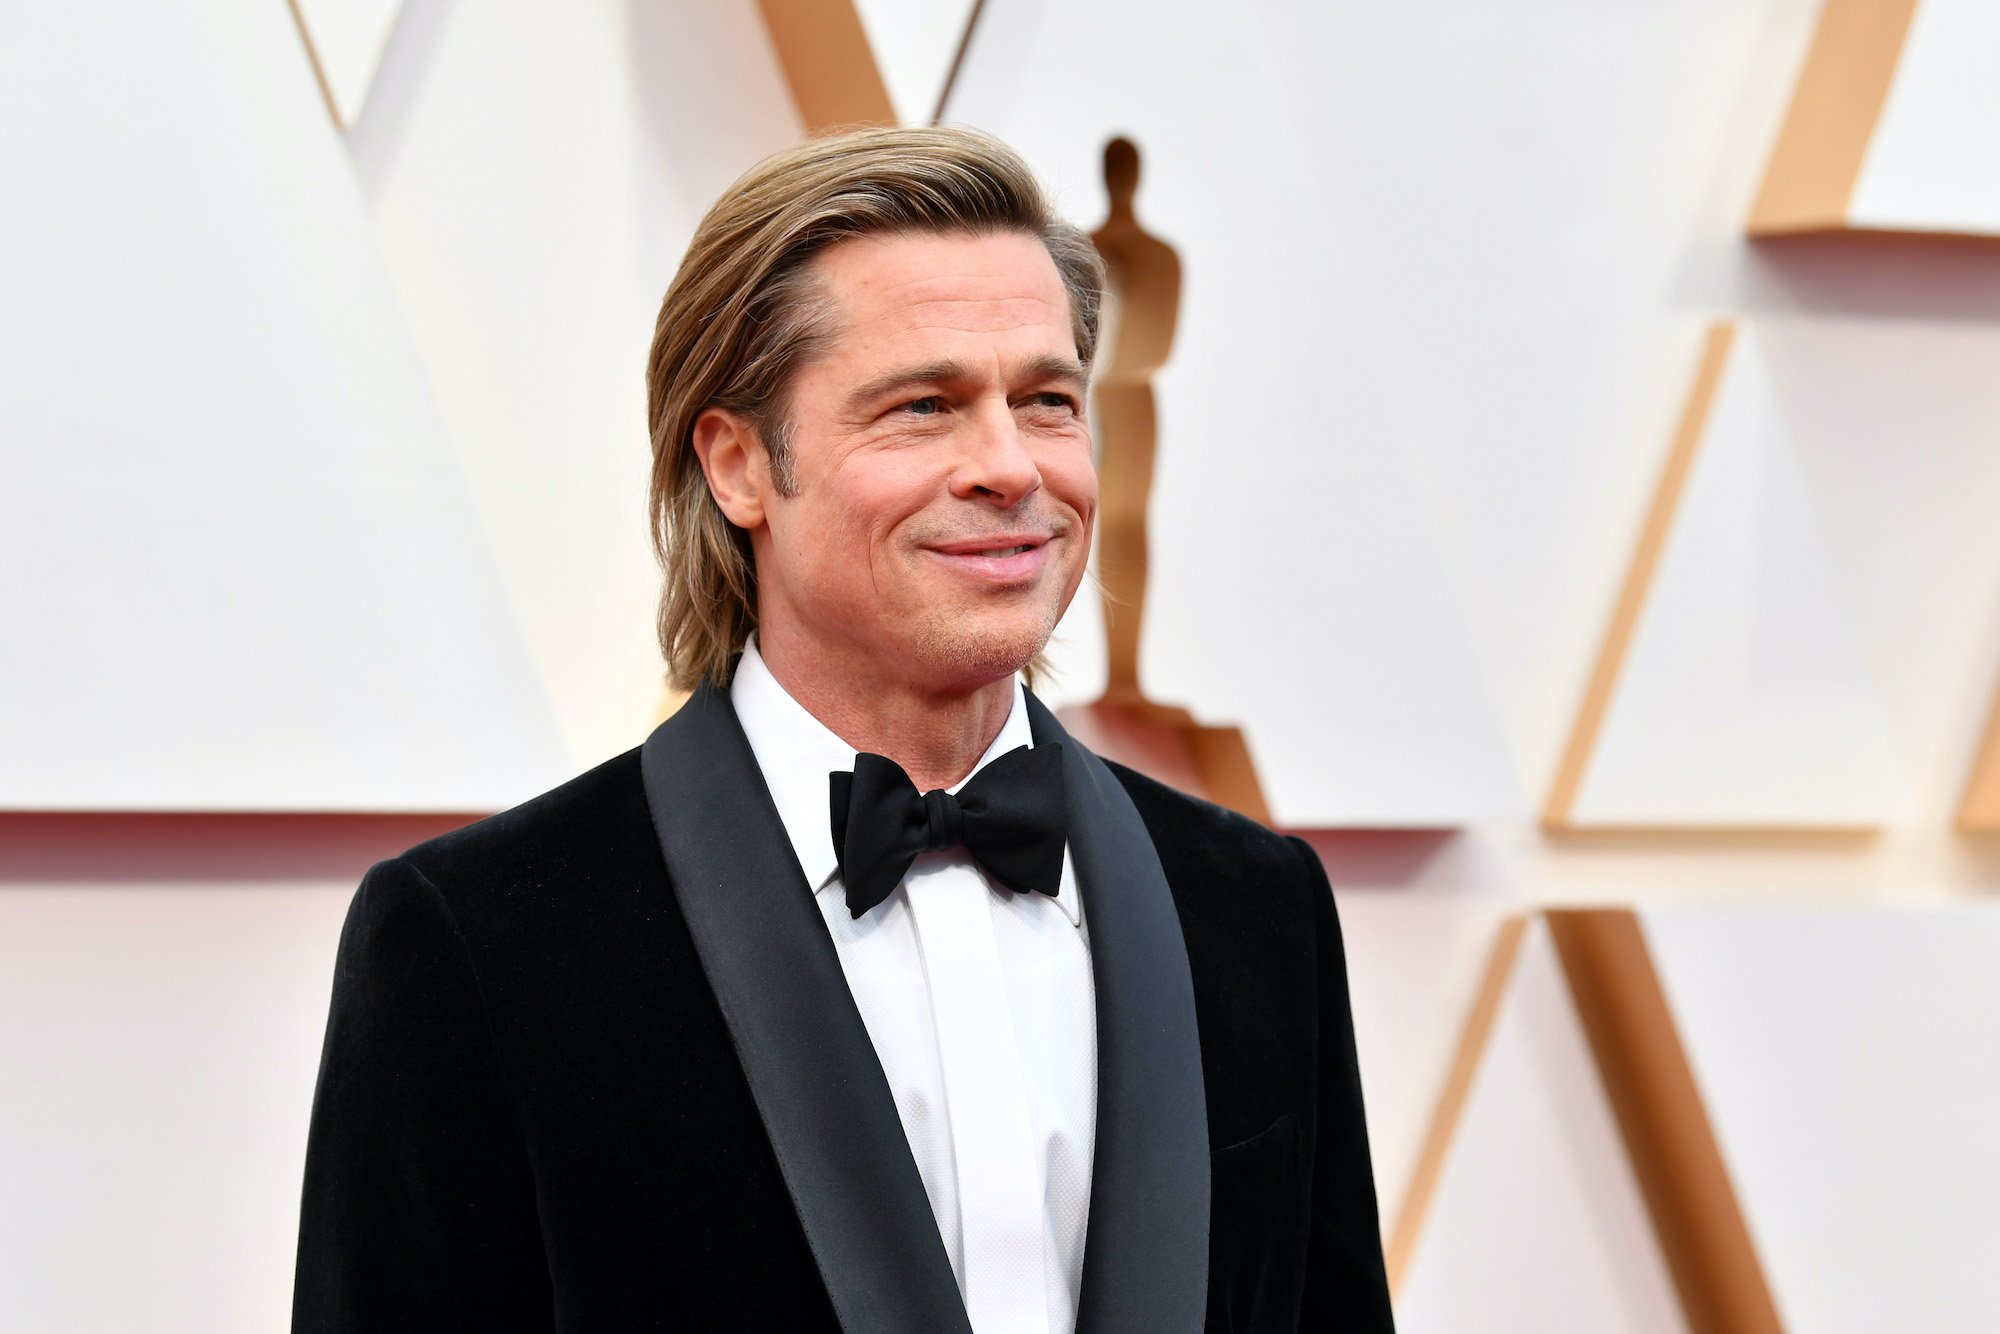 Brad Pitt on Fashion: ‘You Get Older, You Get Crankier, and Comfort Becomes More Important’